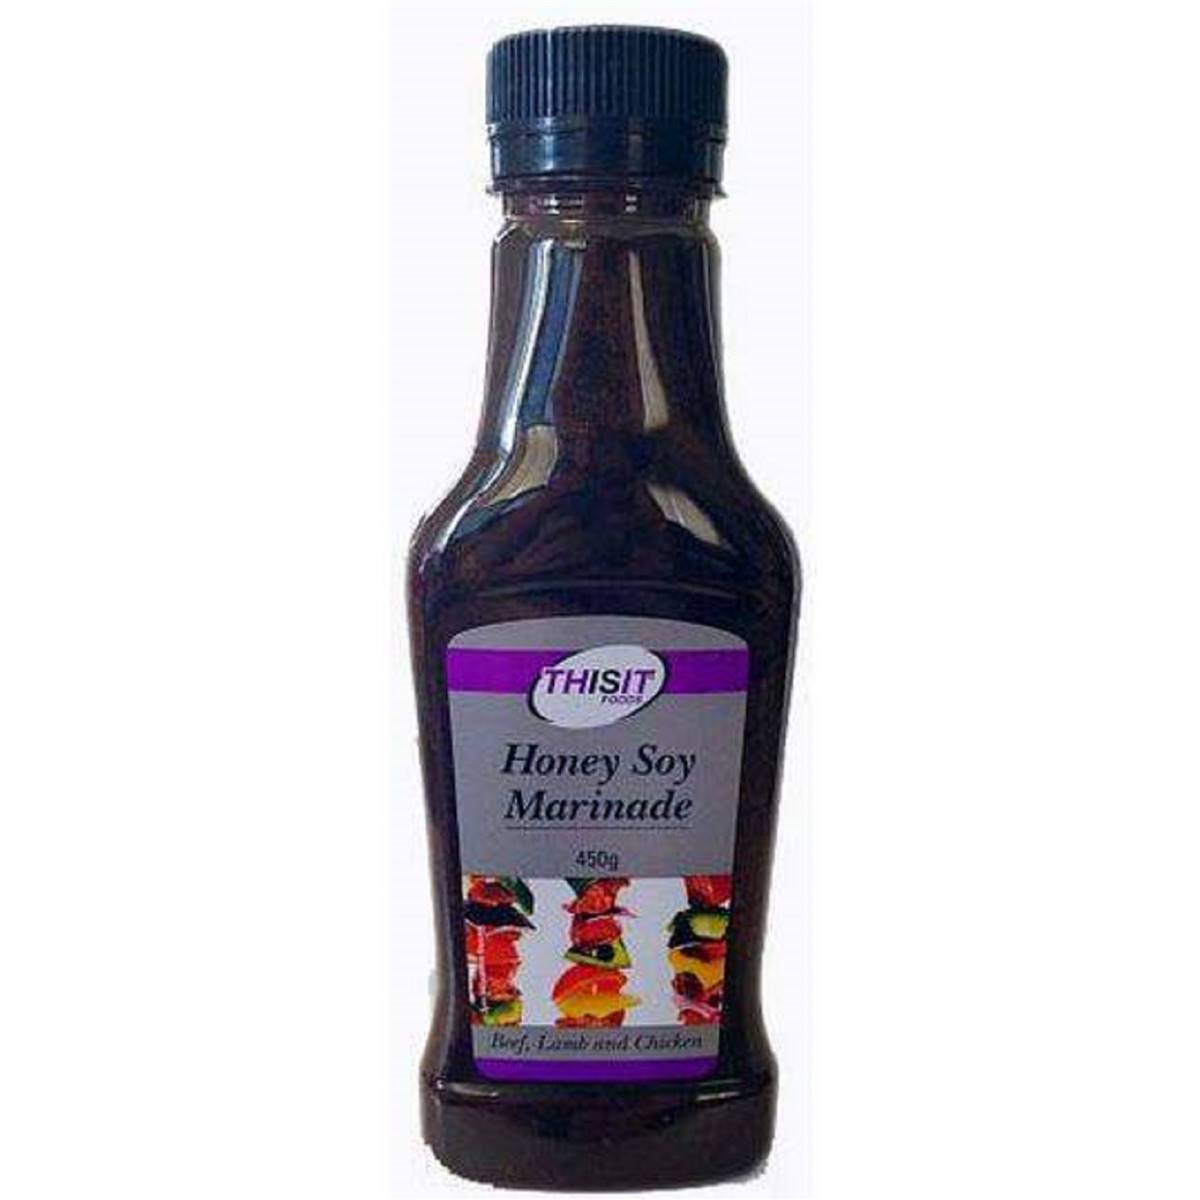 Calories in Thisit Marinade Honey Soy